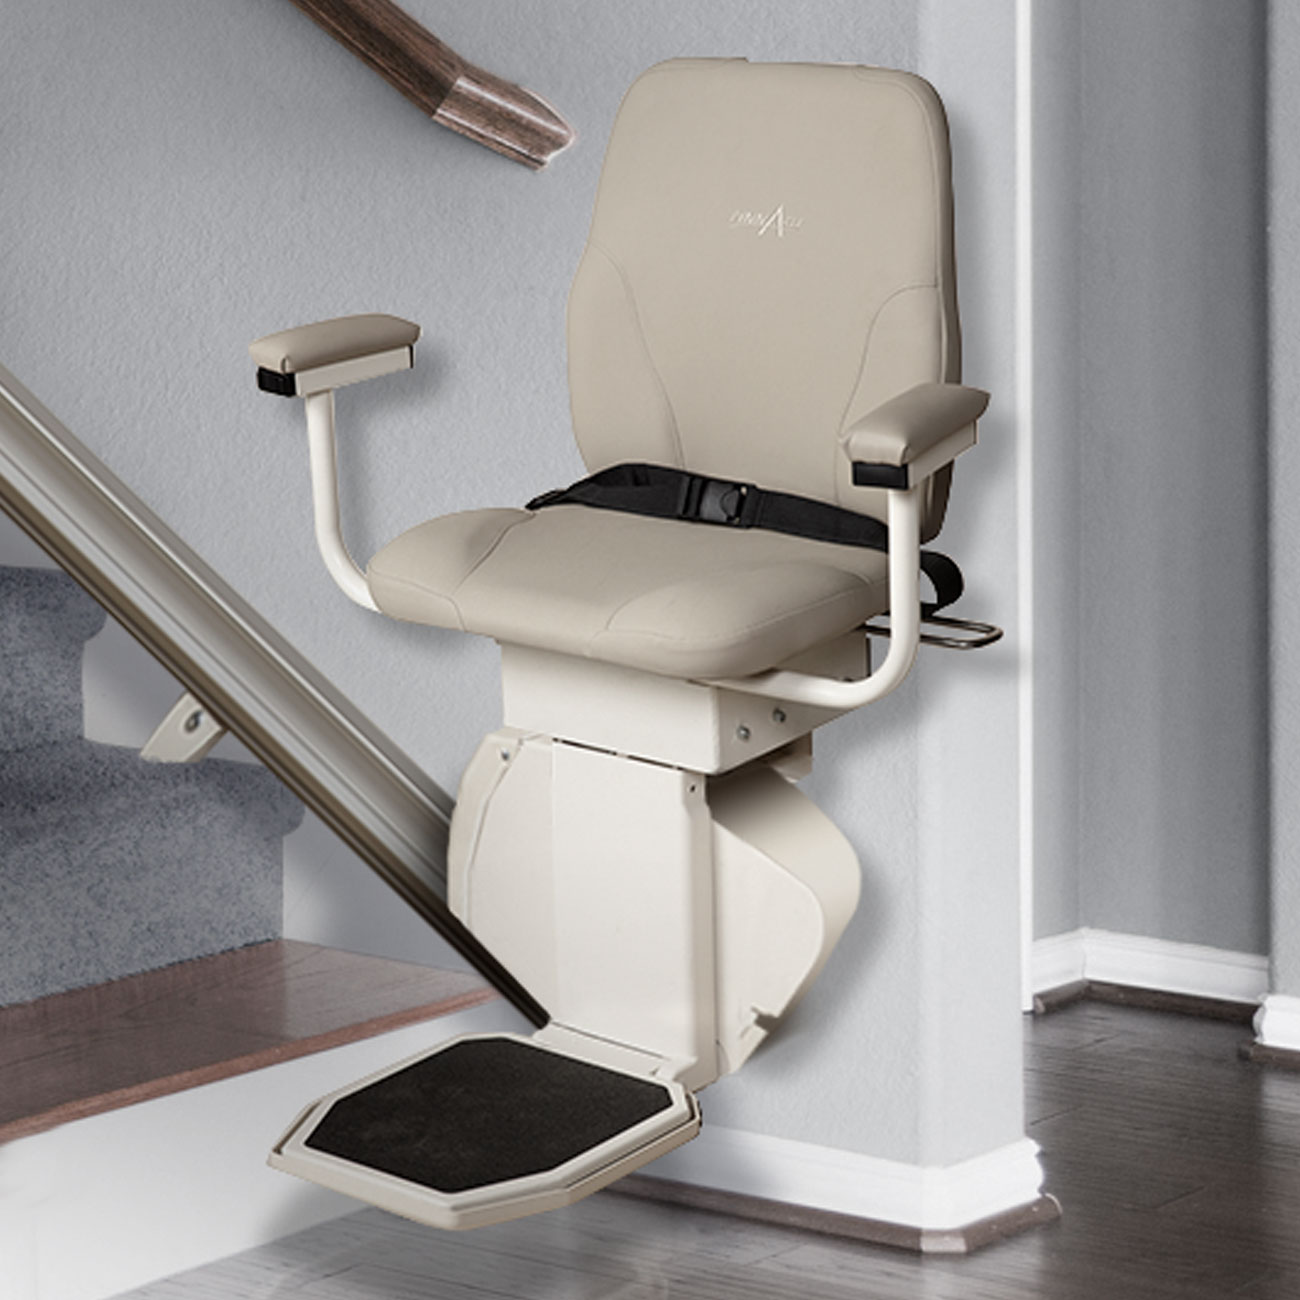 Photo of Leaf Home Safety Solution's SL600HD option for stair-lifts